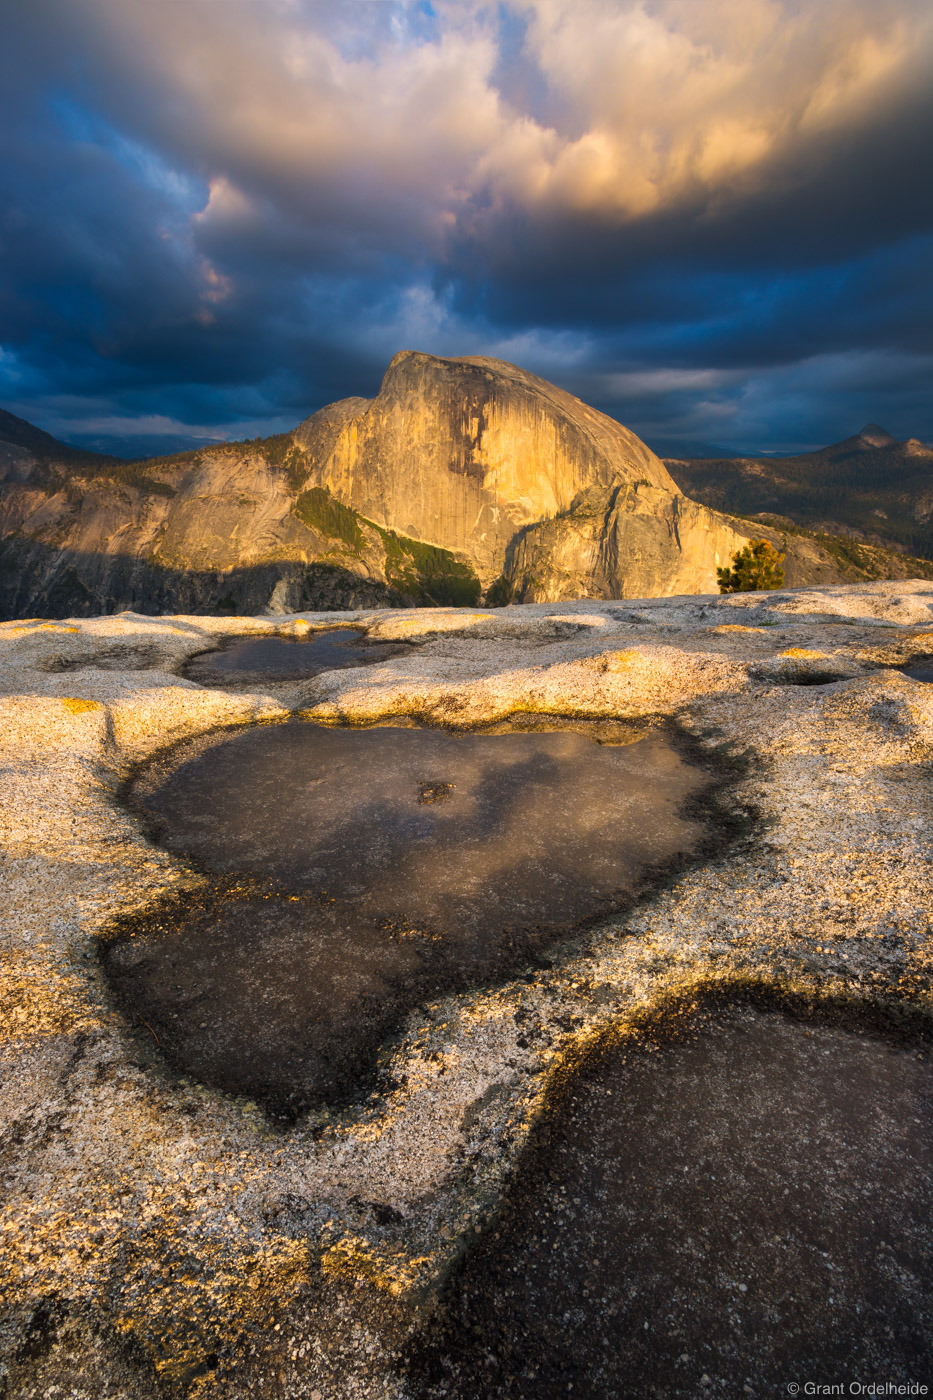 A dramatic sunset over Half Dome from across the valley on the summit of North Dome.